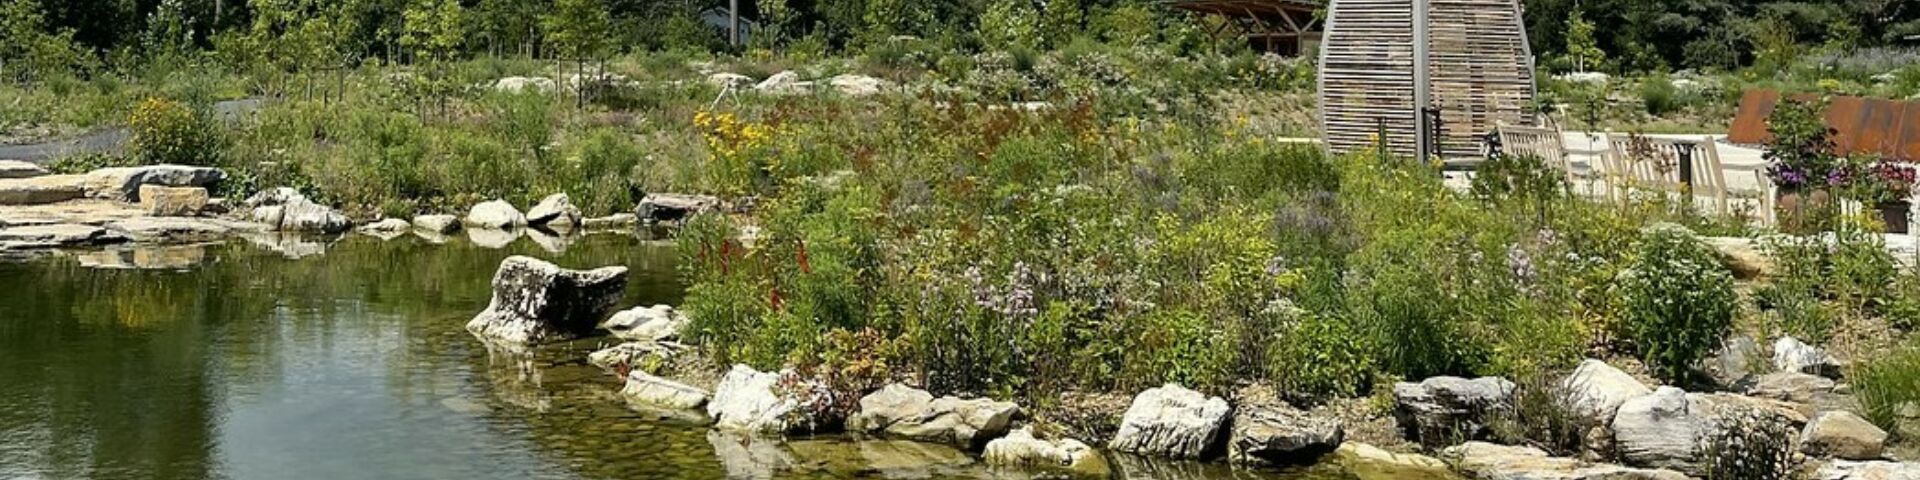 Photo of the pond at the penn state arboretum.